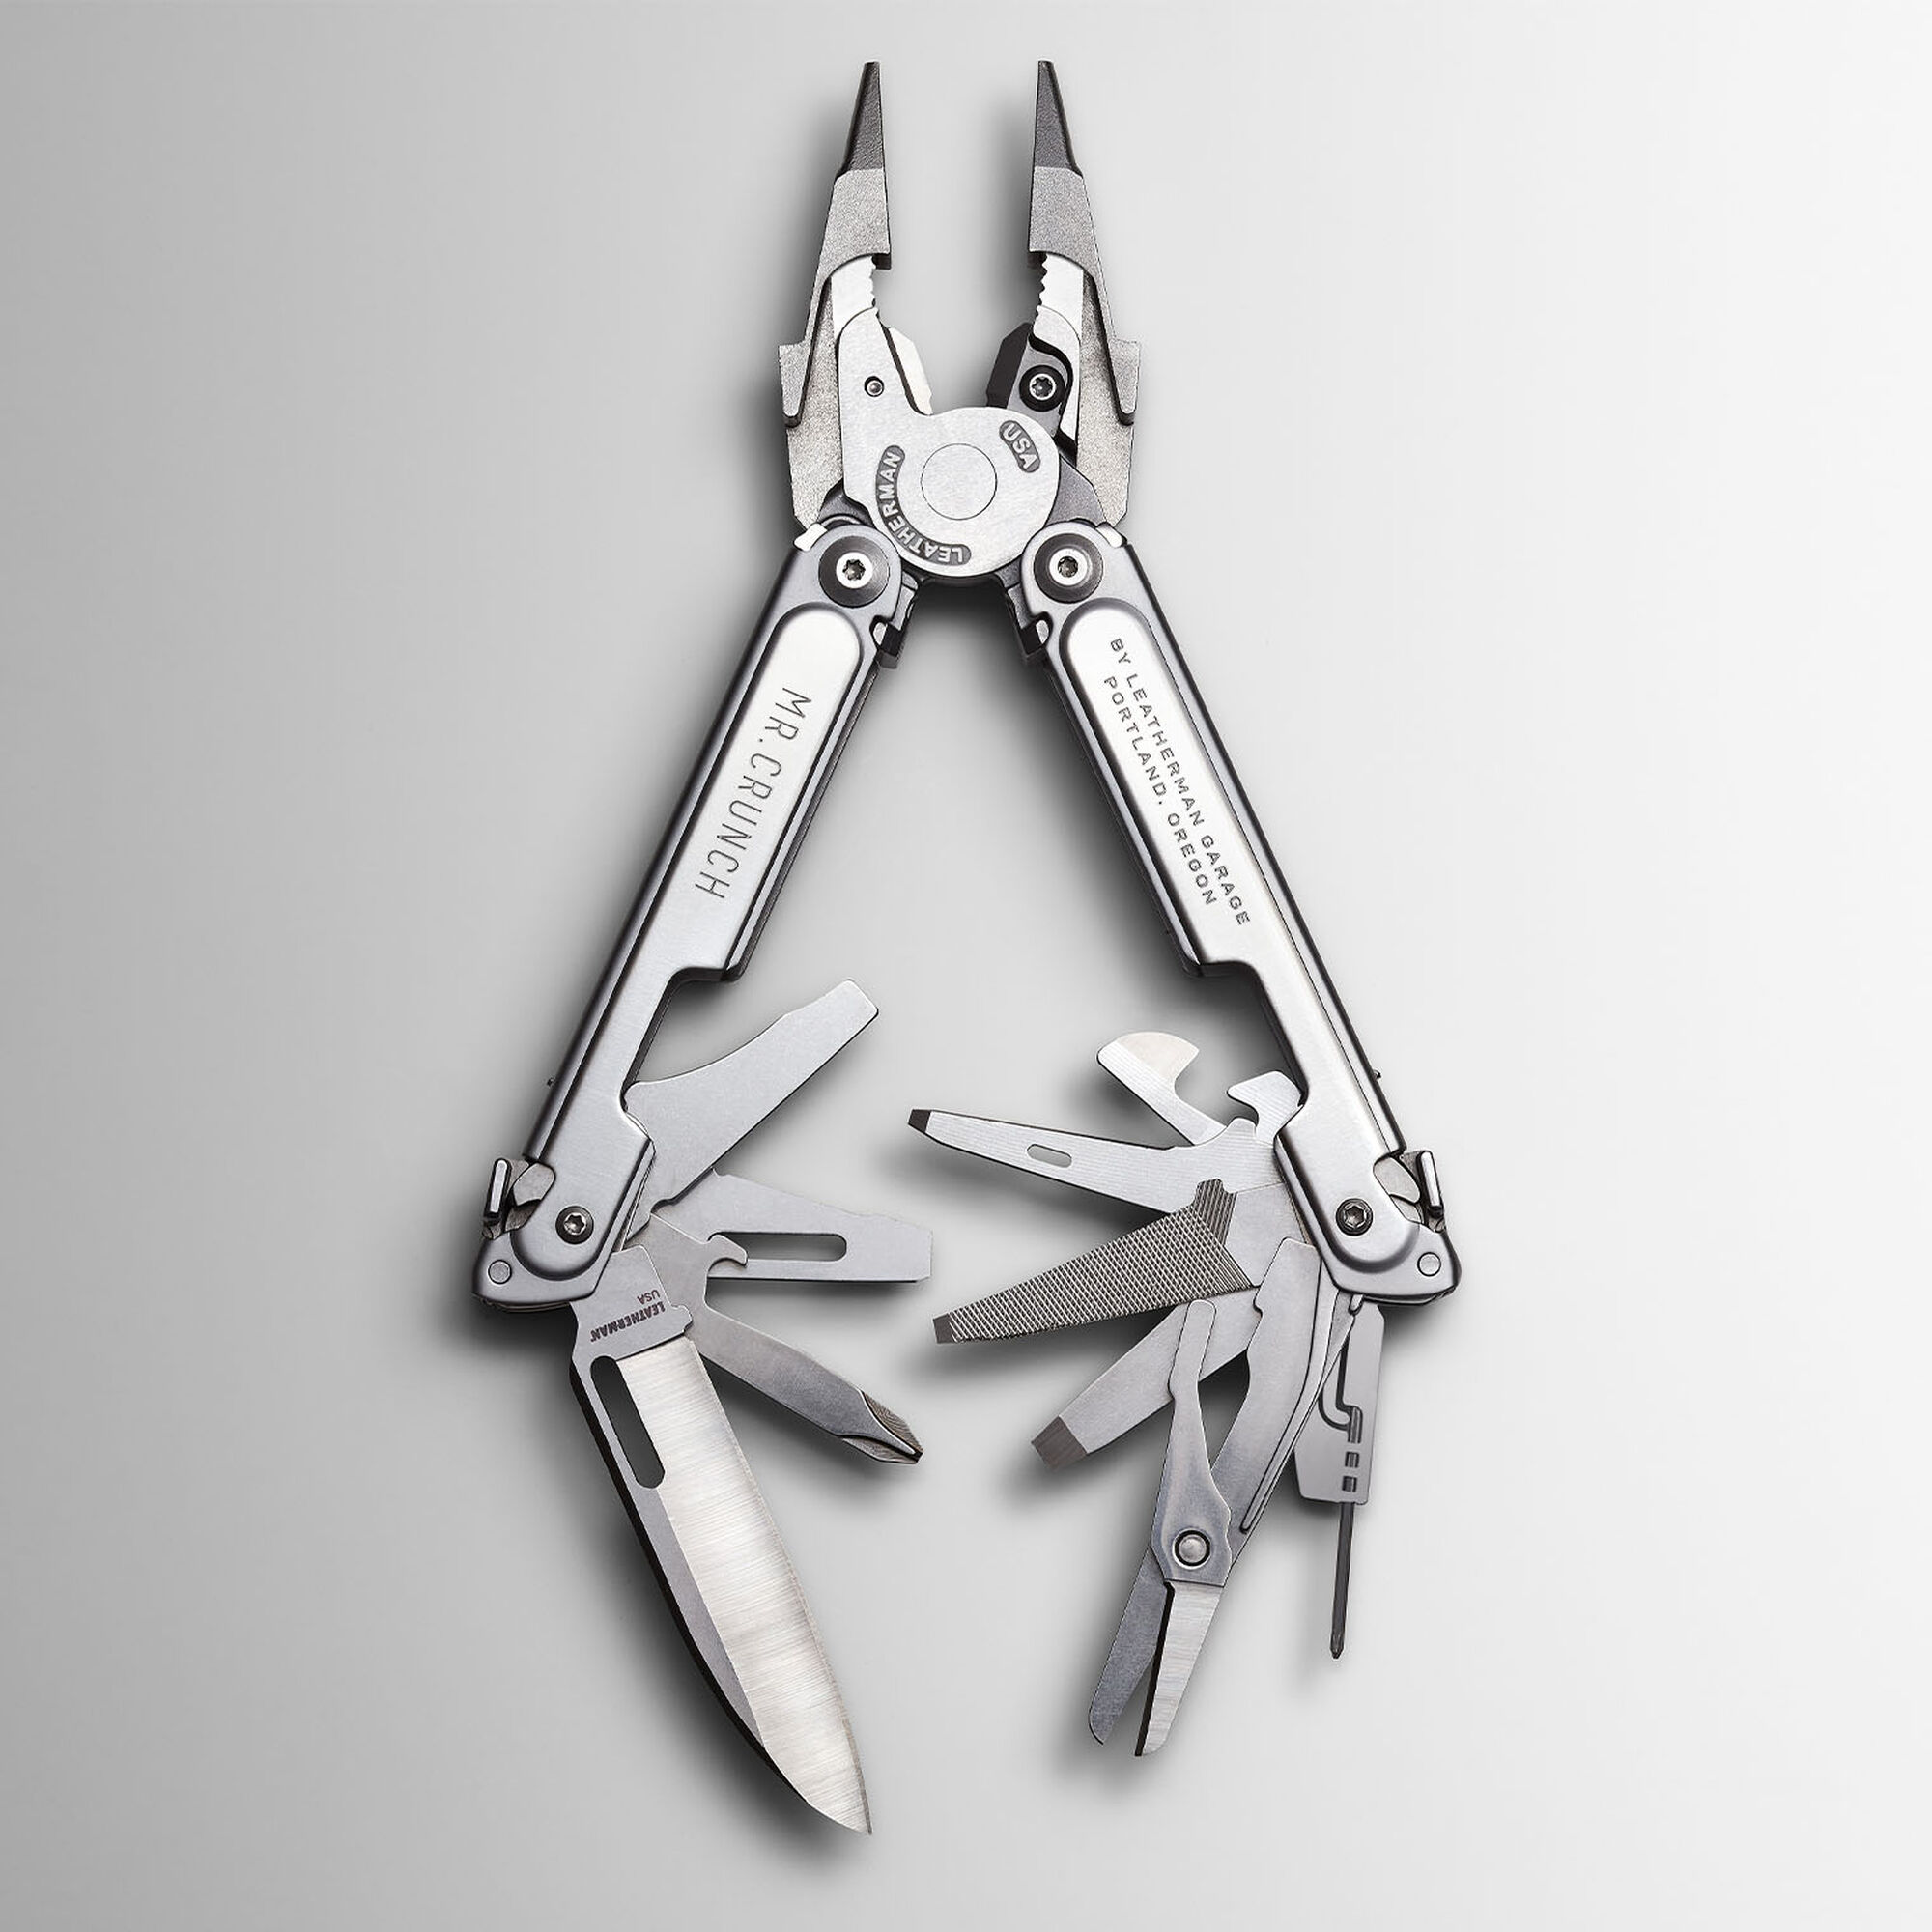 Read more about the article Leatherman – Mr. Crunch